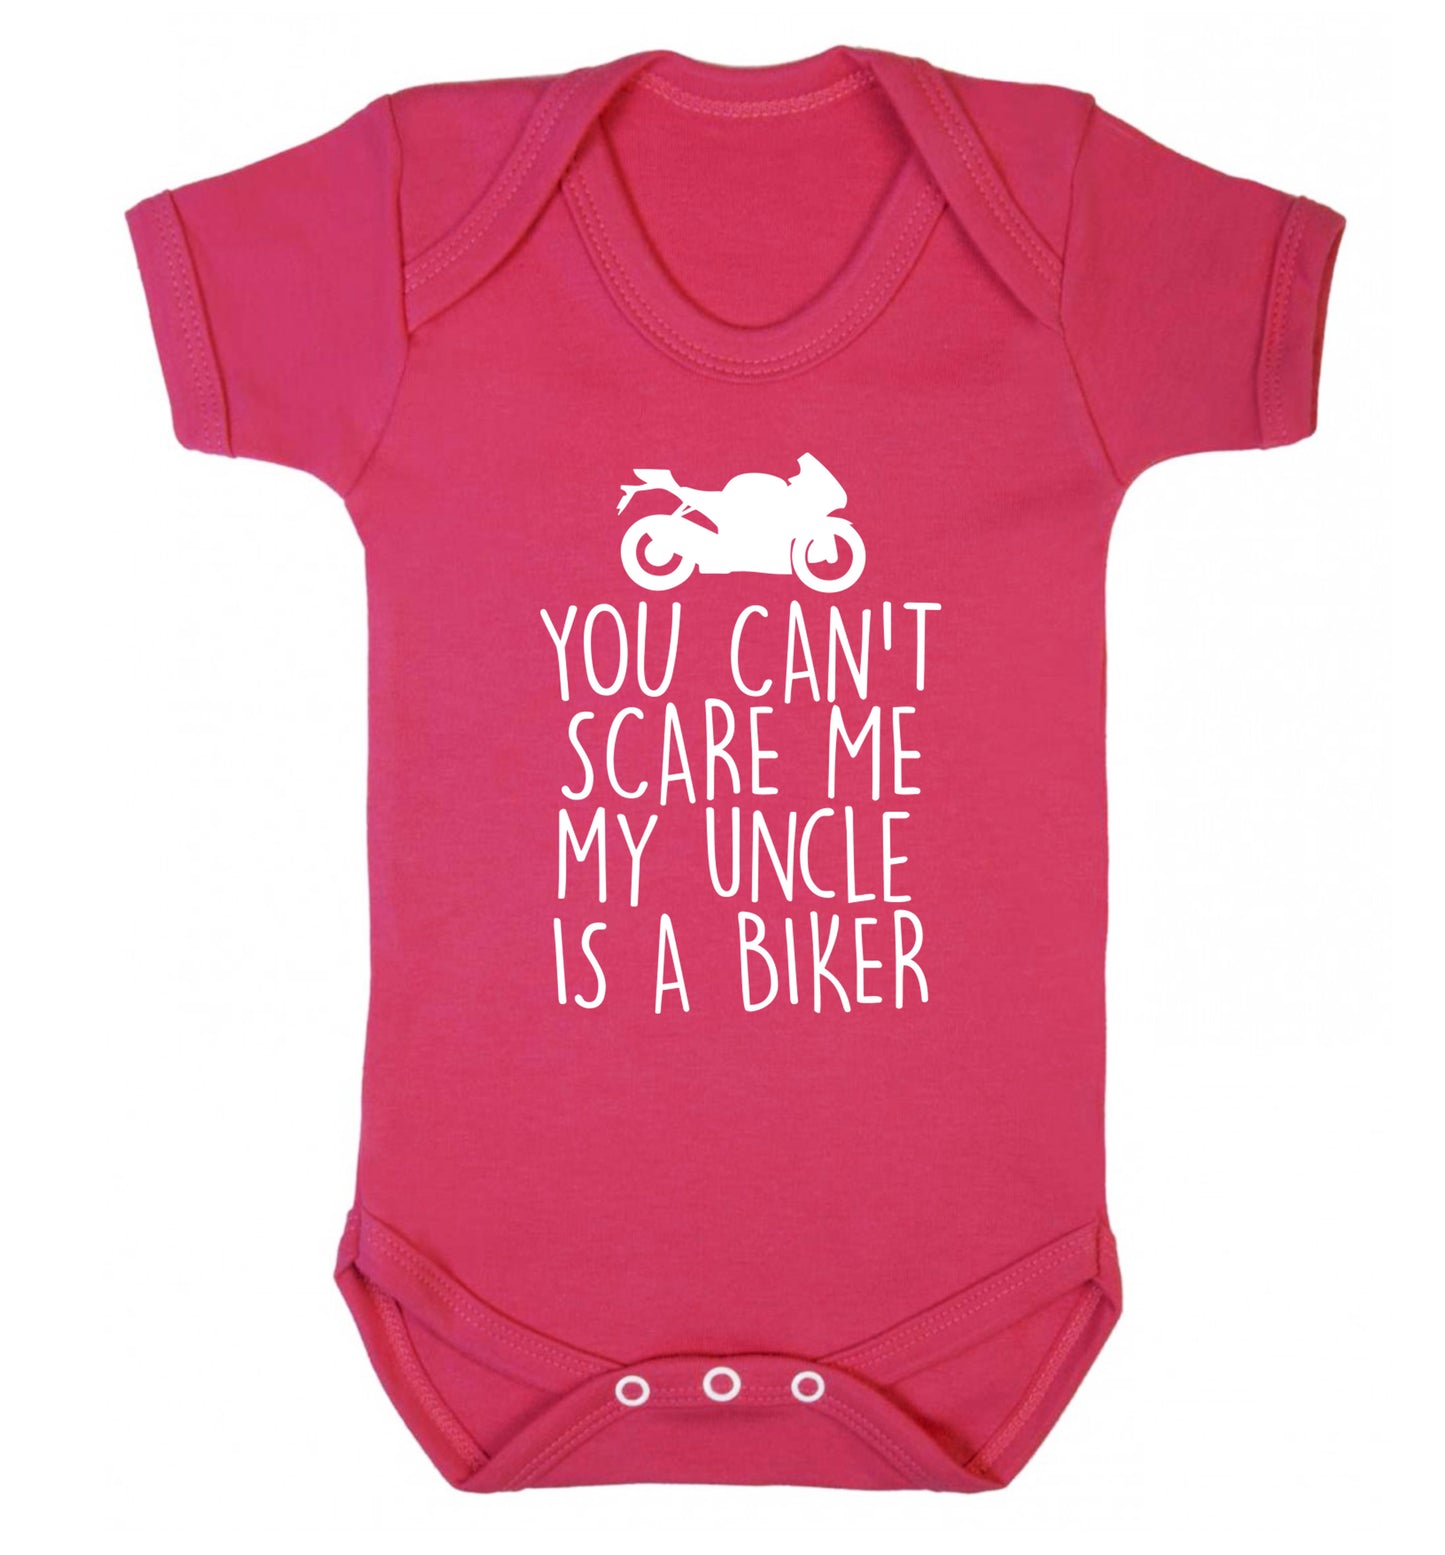 You can't scare me my uncle is a biker Baby Vest dark pink 18-24 months